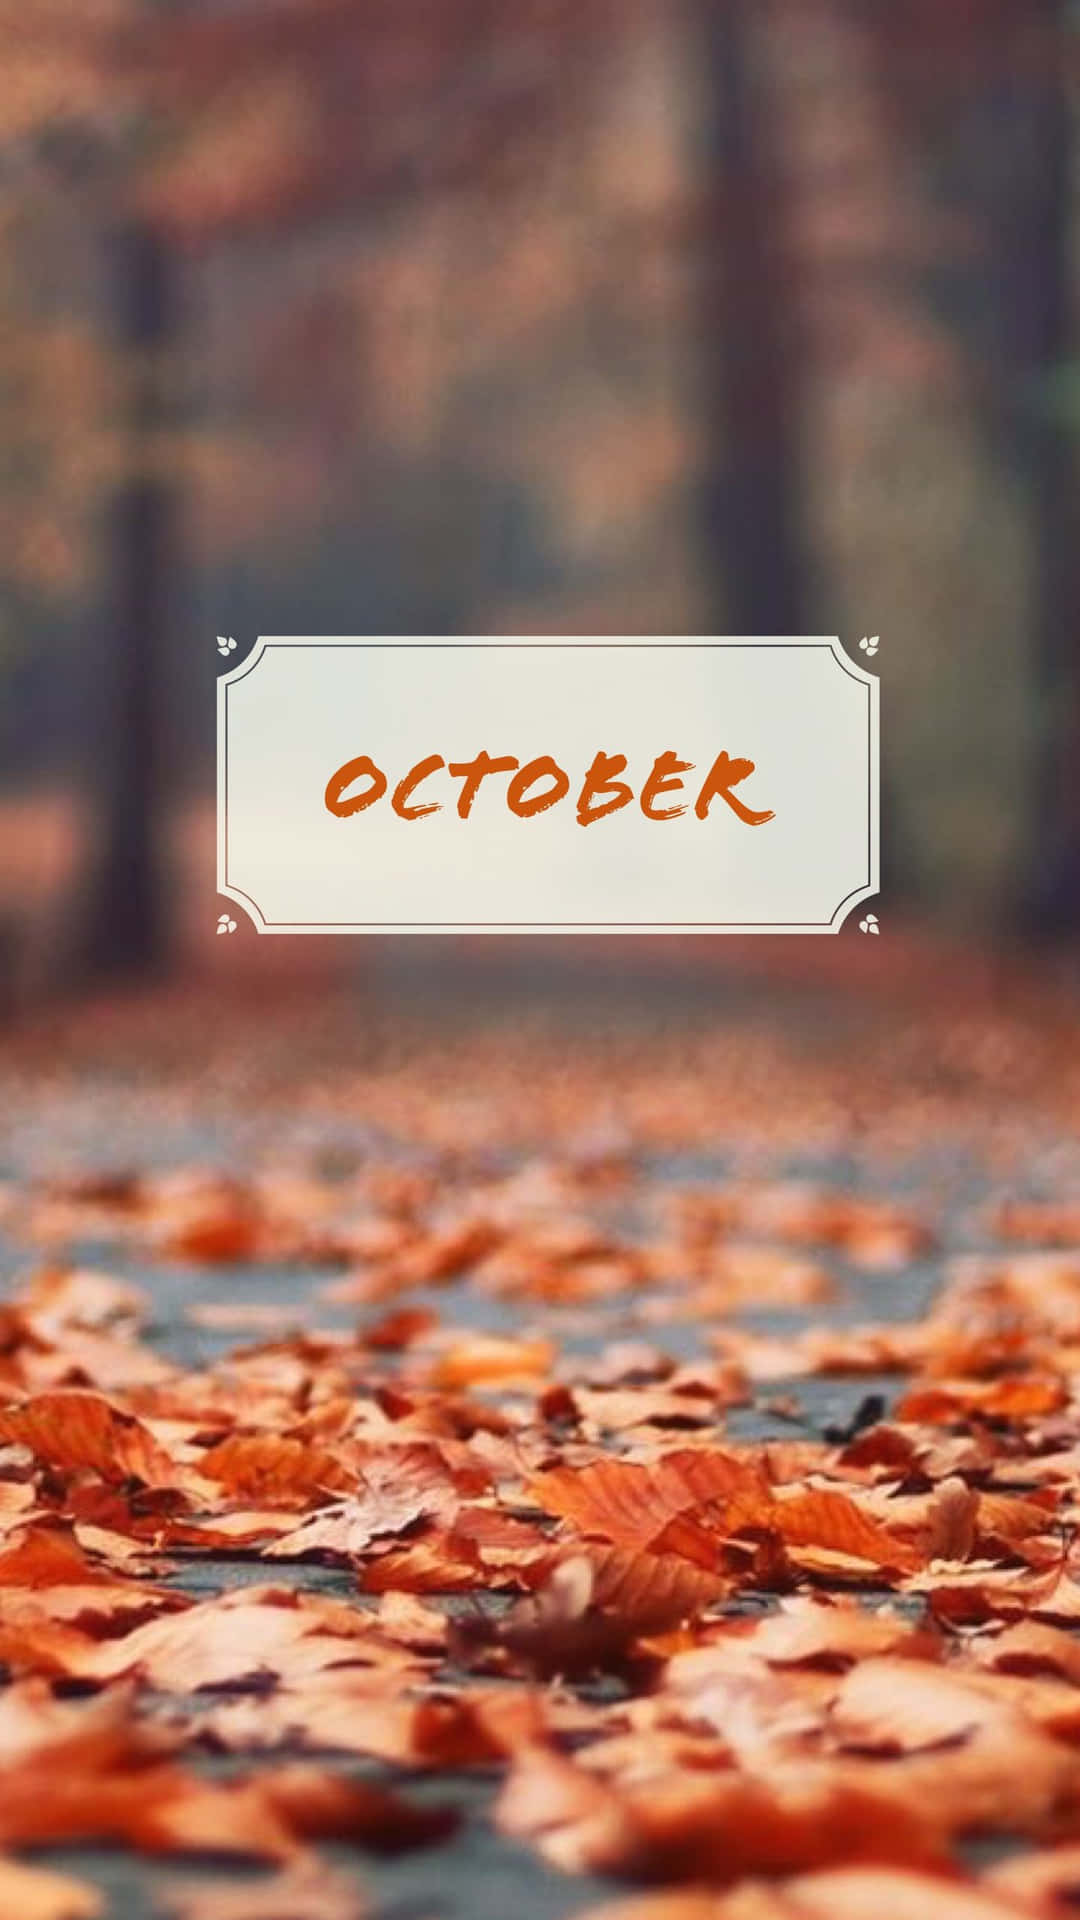 October-inspired iPhone wallpaper reflecting the beauty of autumn Wallpaper